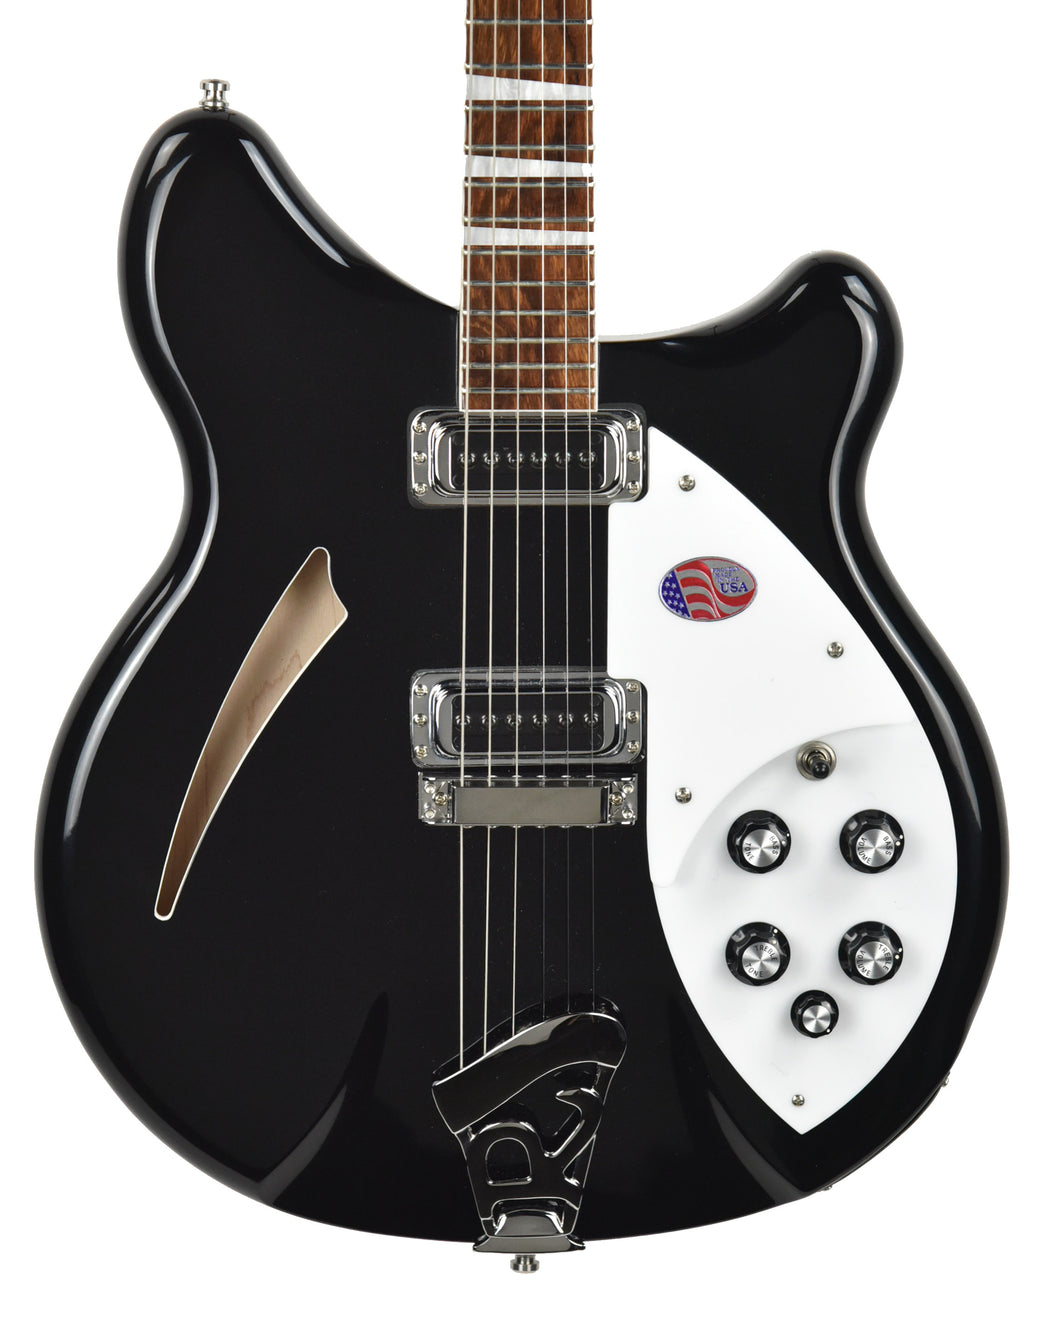 Rickenbacker 360 Deluxe Thinline Electric Guitar in Jetglo 2018736 - The Music Gallery